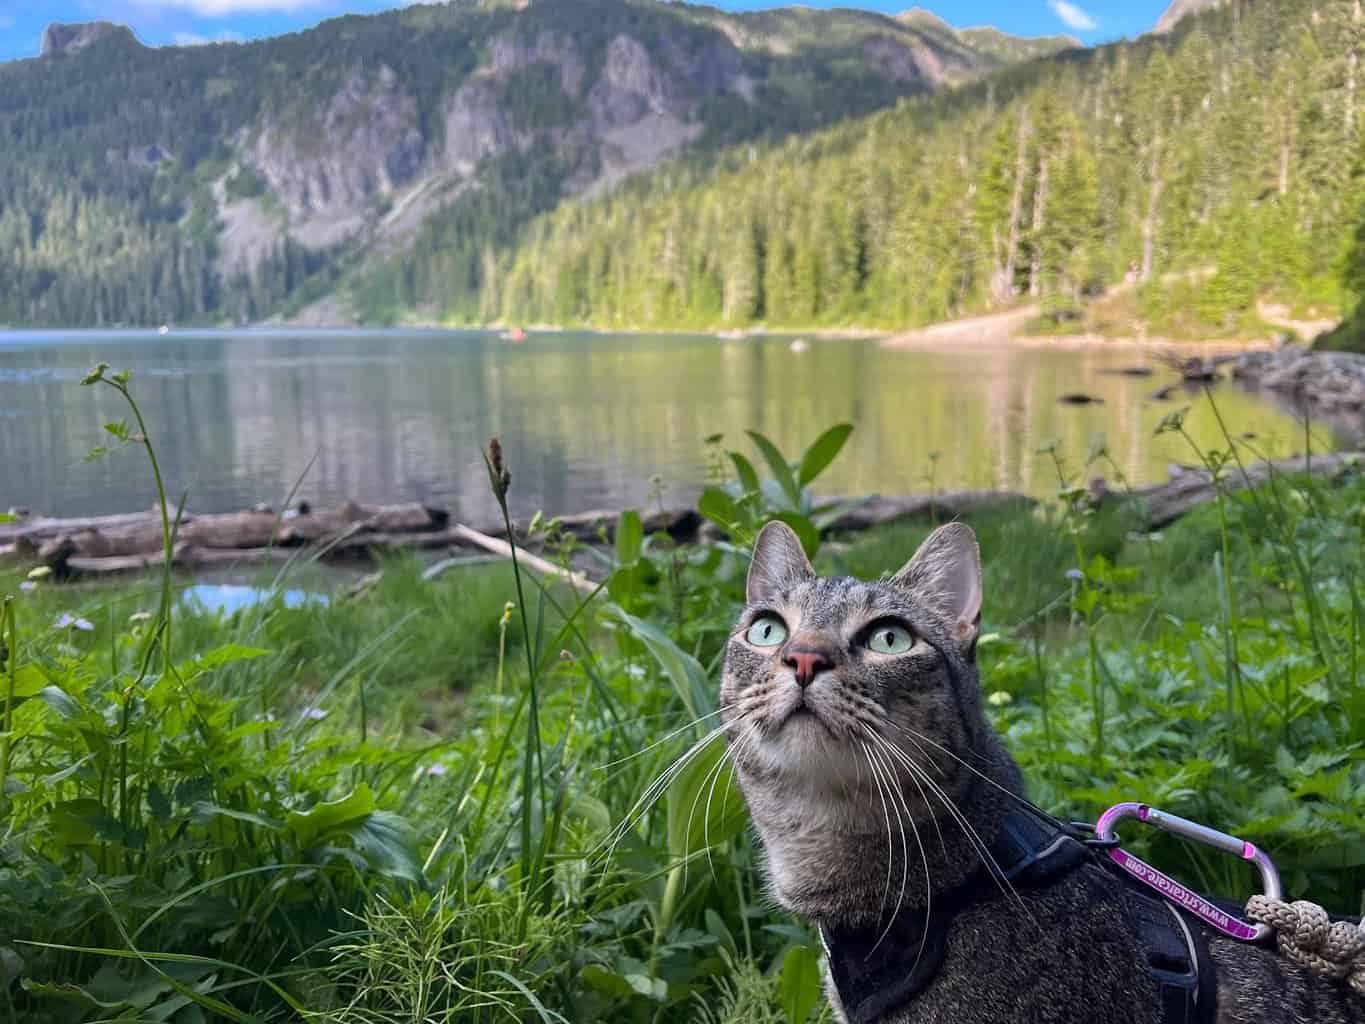 hiking trip with an adventure cat